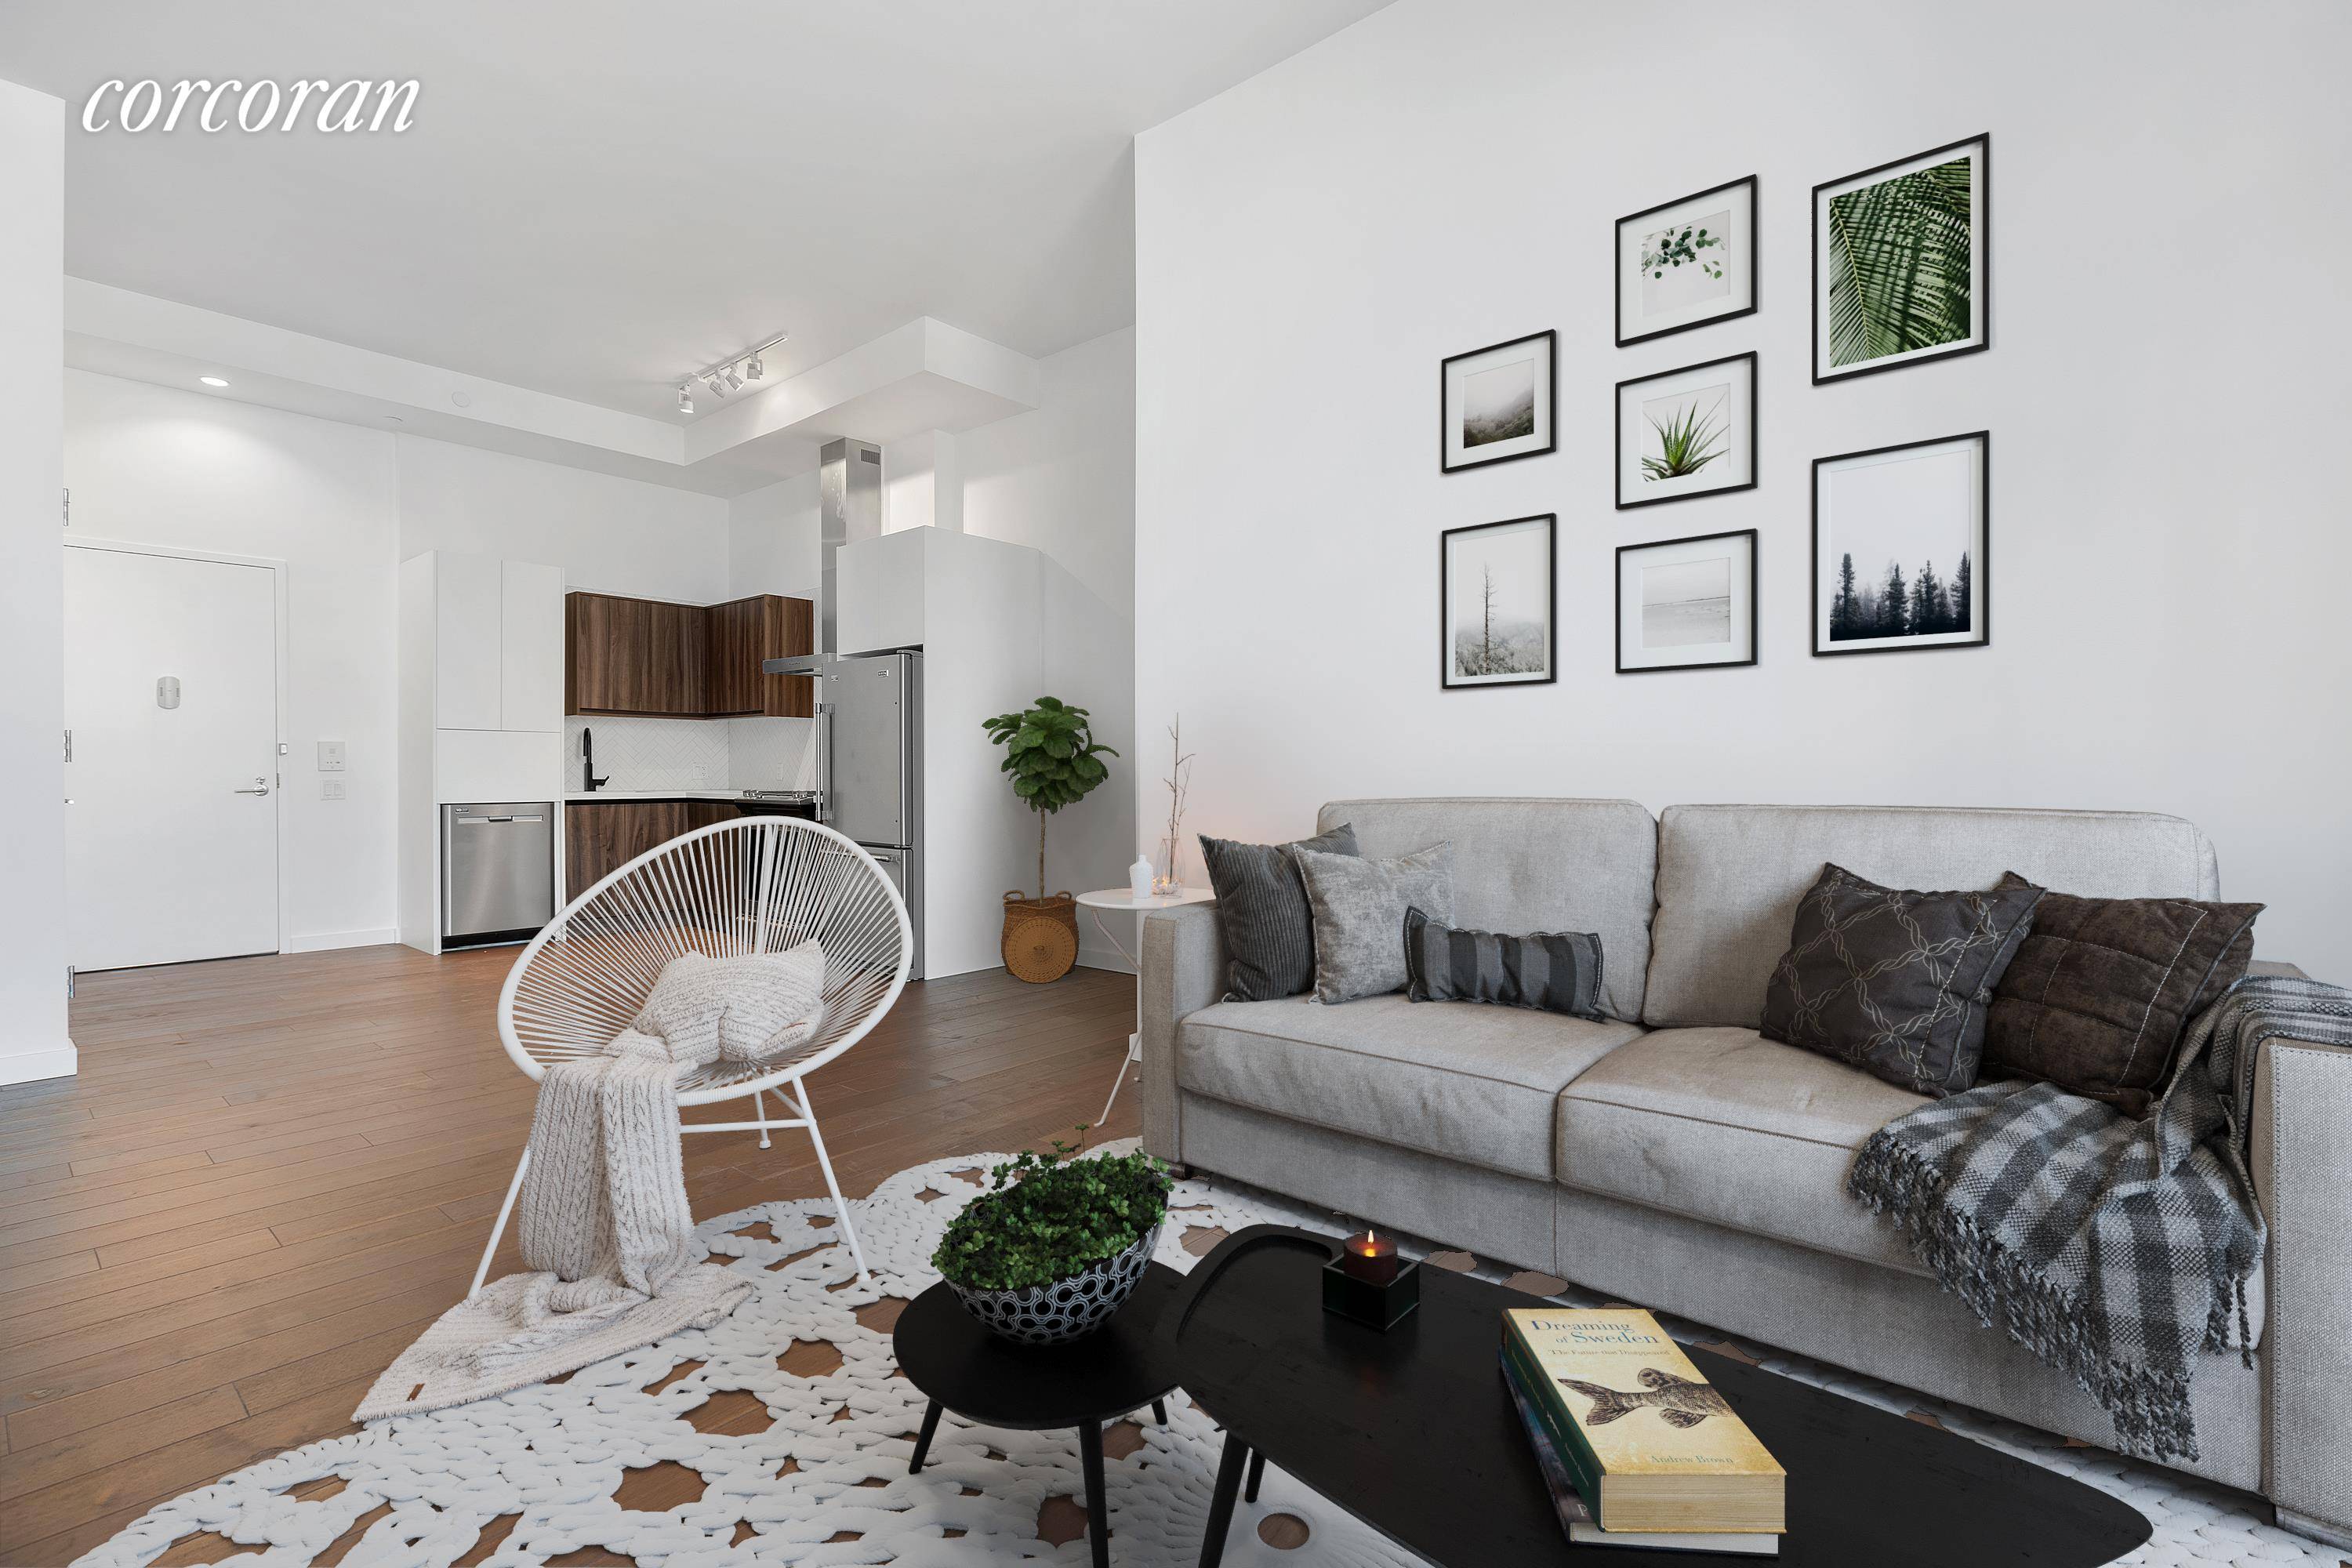 Welcome to 21 India Street a brand new 1 bedroom home in the heart of Brooklyn This loft like apartment features oversized windows, wide plank walnut floors, and 11 foot ...